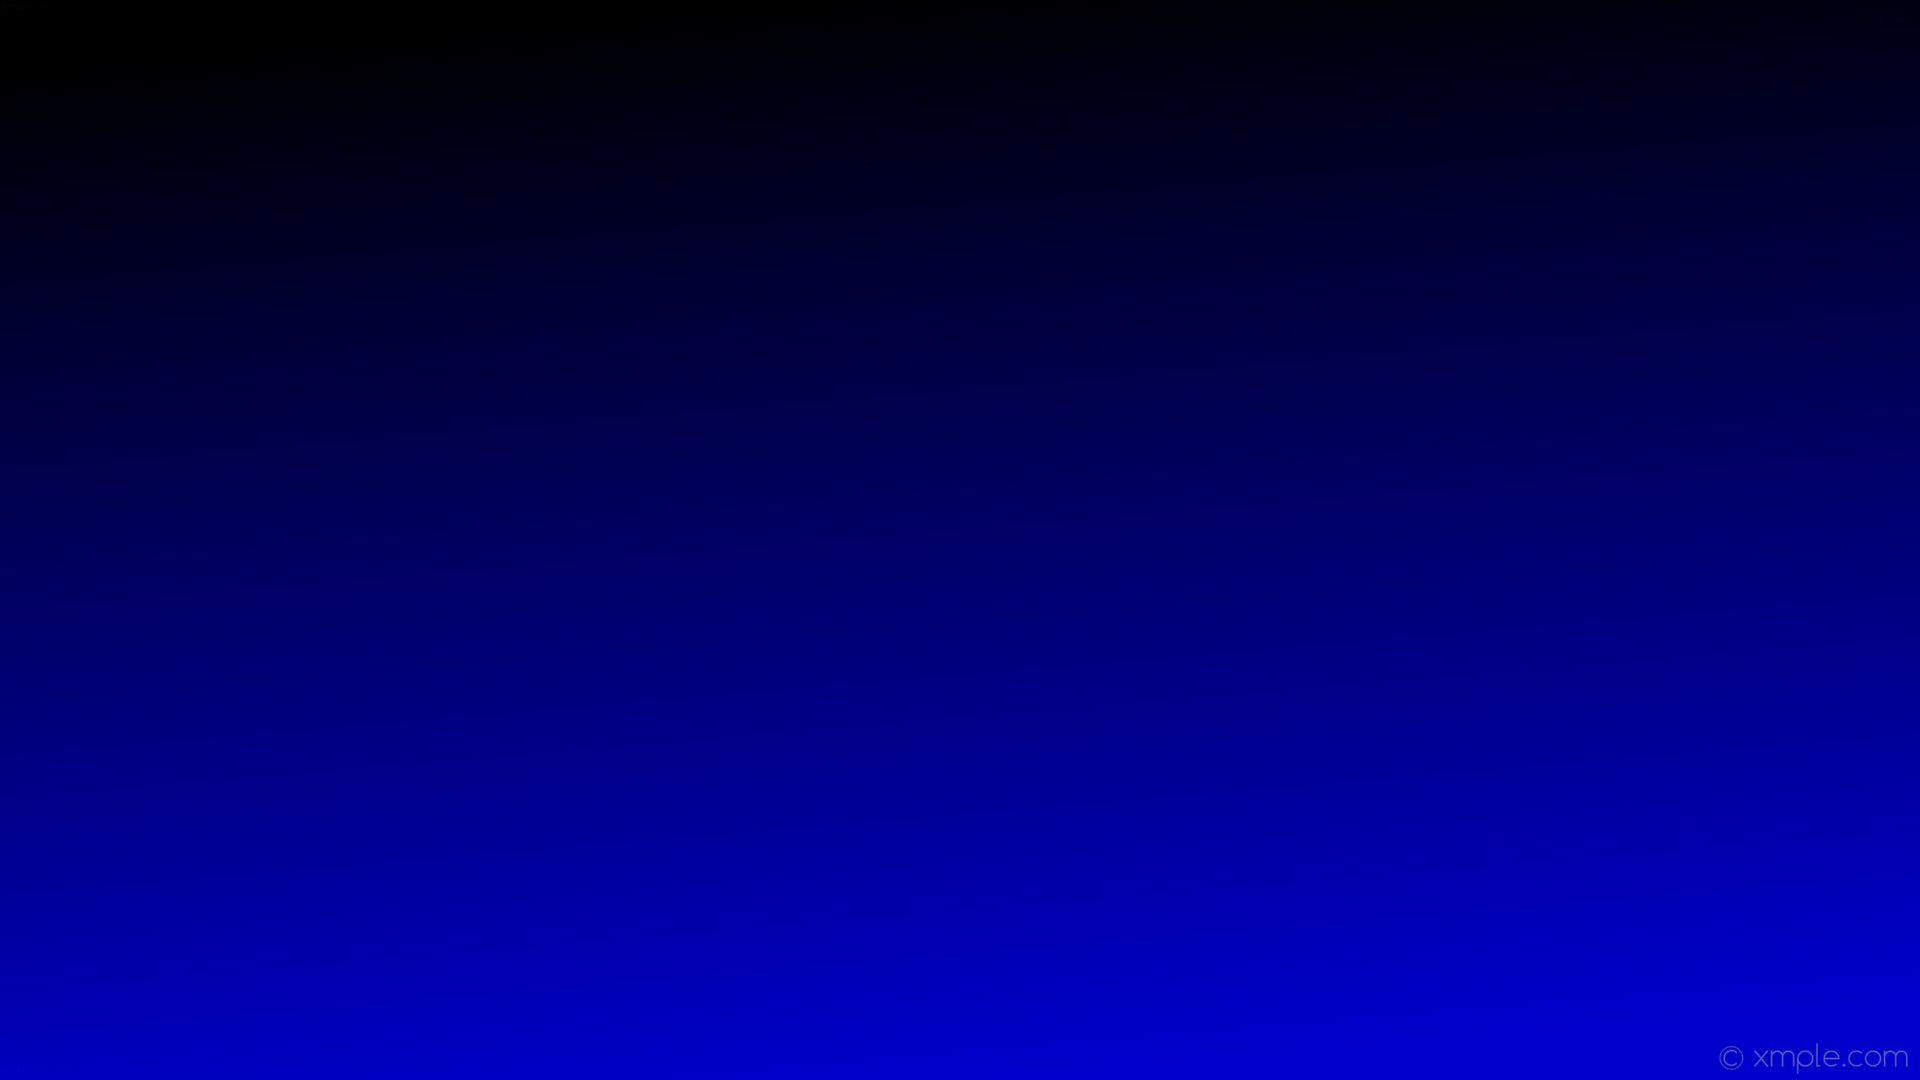 Dark Blue Fading To Light Blue Wallpapers - Wallpaper Cave